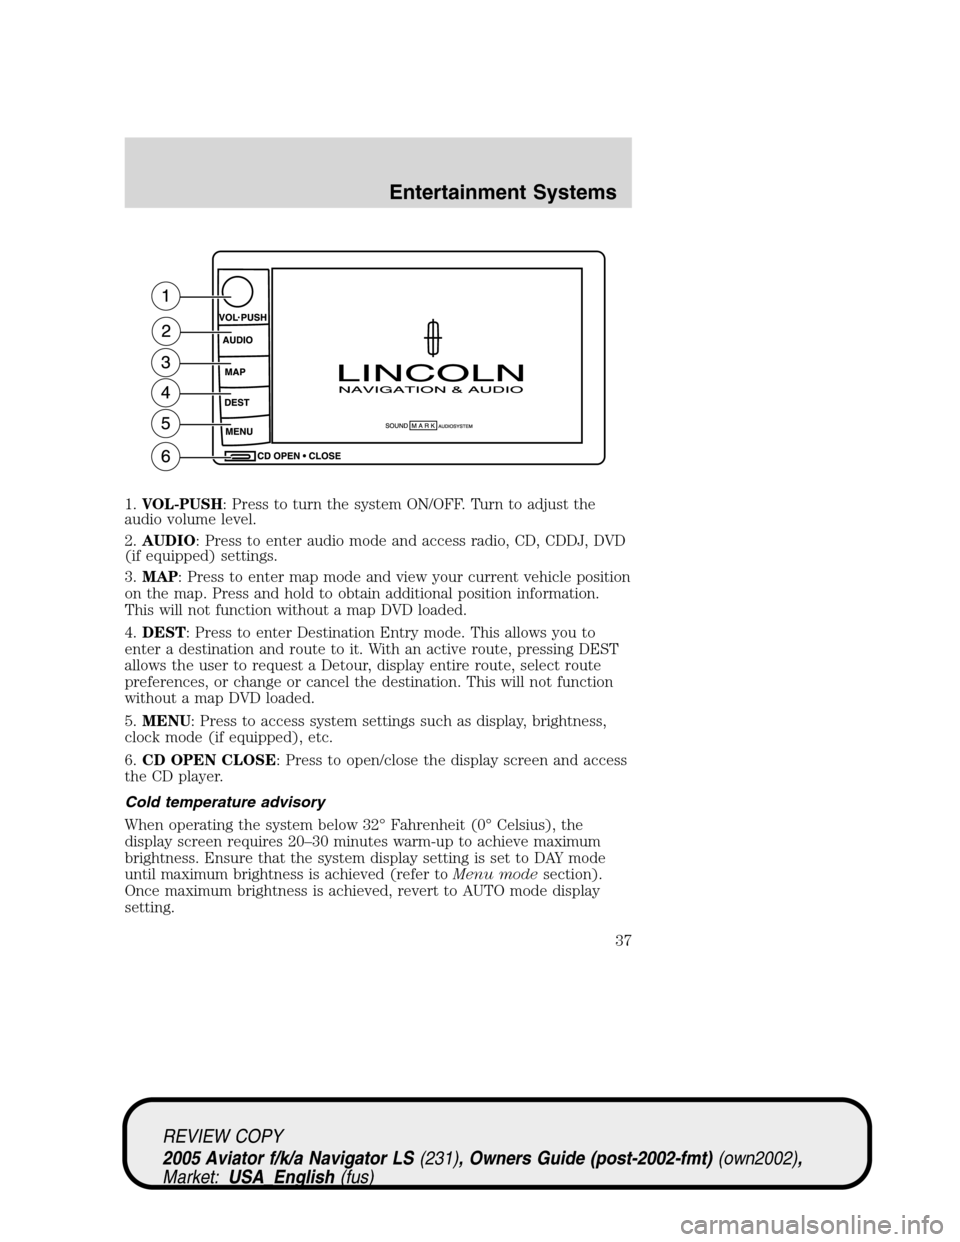 LINCOLN AVIATOR 2005  Owners Manual 1.VOL-PUSH: Press to turn the system ON/OFF. Turn to adjust the
audio volume level.
2.AUDIO: Press to enter audio mode and access radio, CD, CDDJ, DVD
(if equipped) settings.
3.MAP: Press to enter map